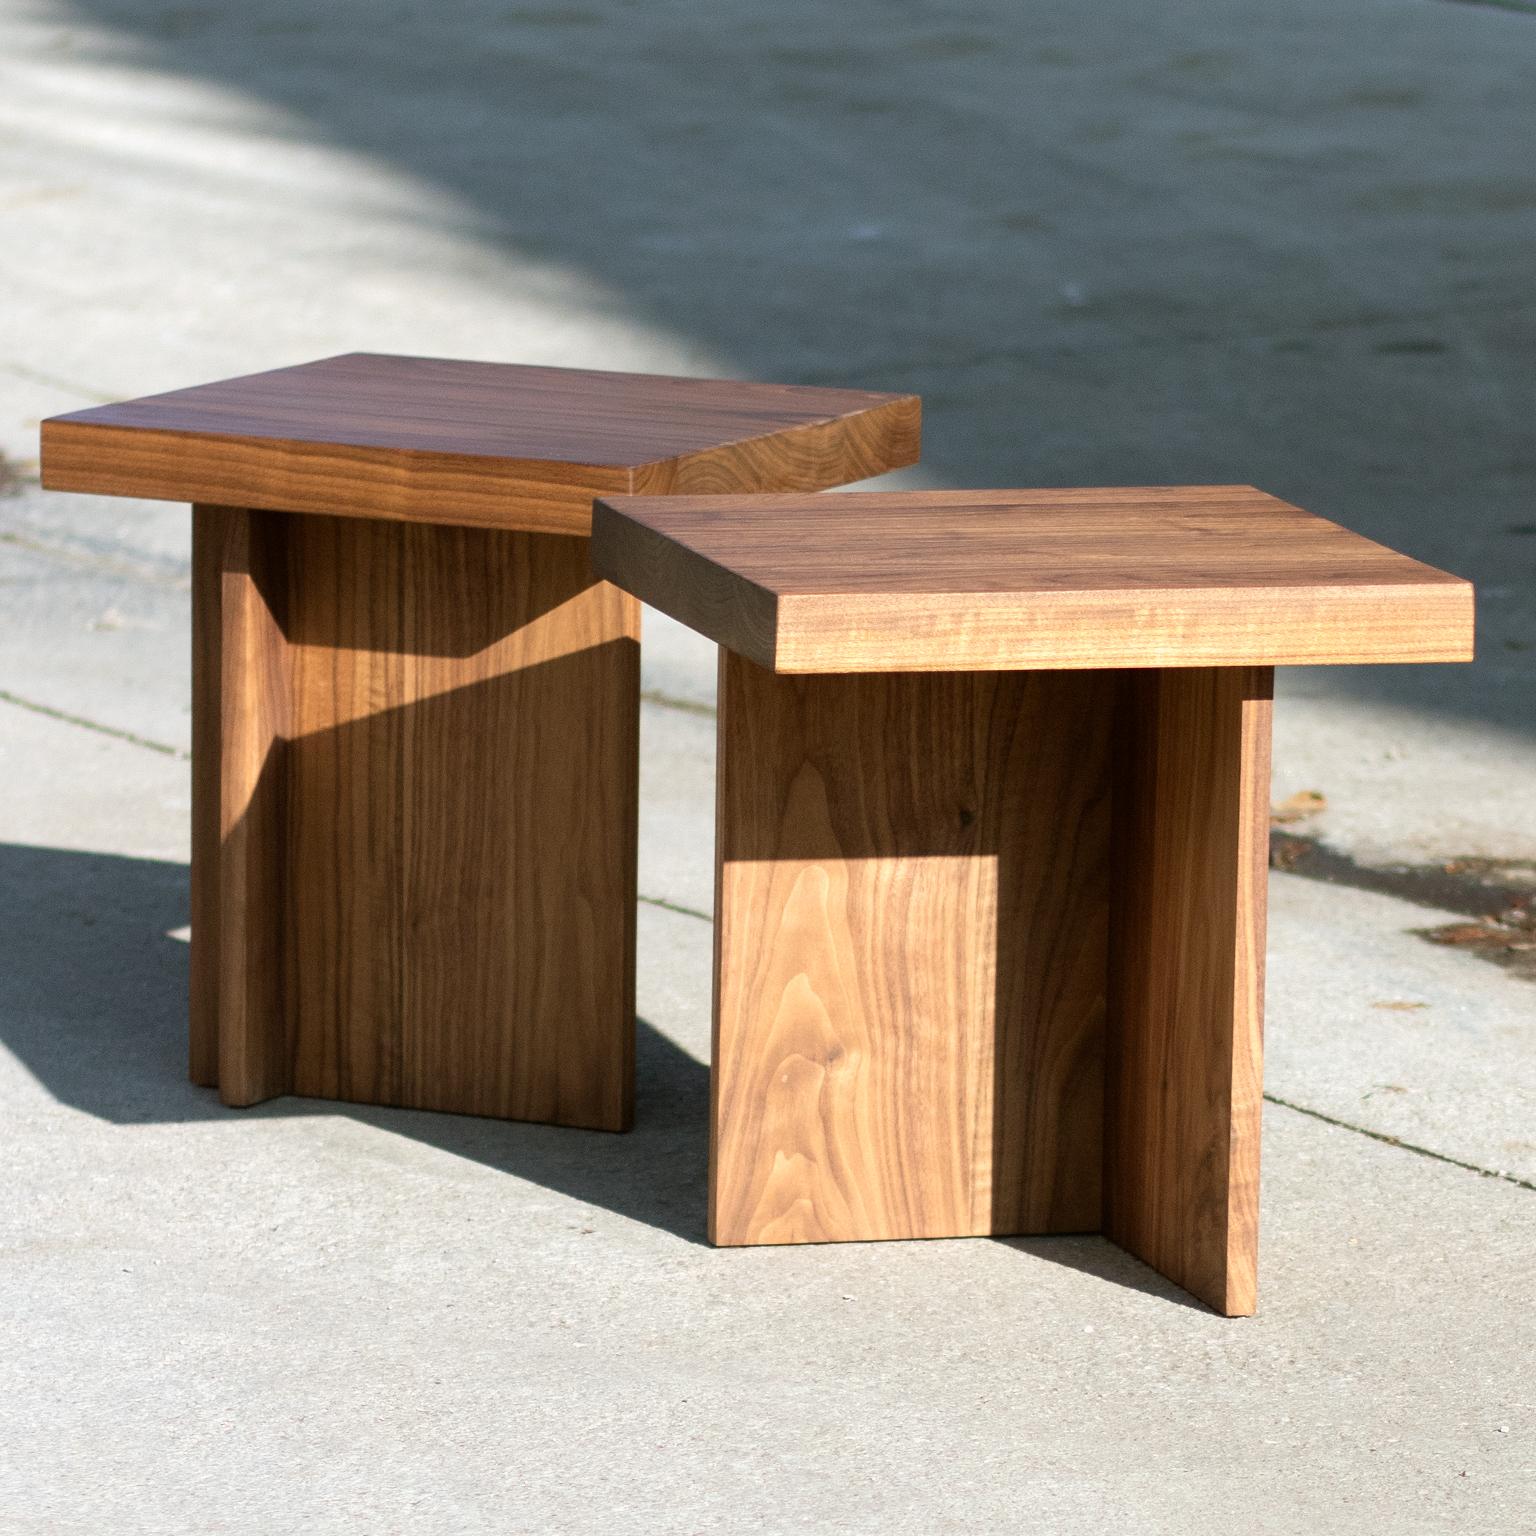 This is a solid walnut side table or small stool. The profile is asymmetrical and architectural while celebrating the natural wood elements. 

Customizable.